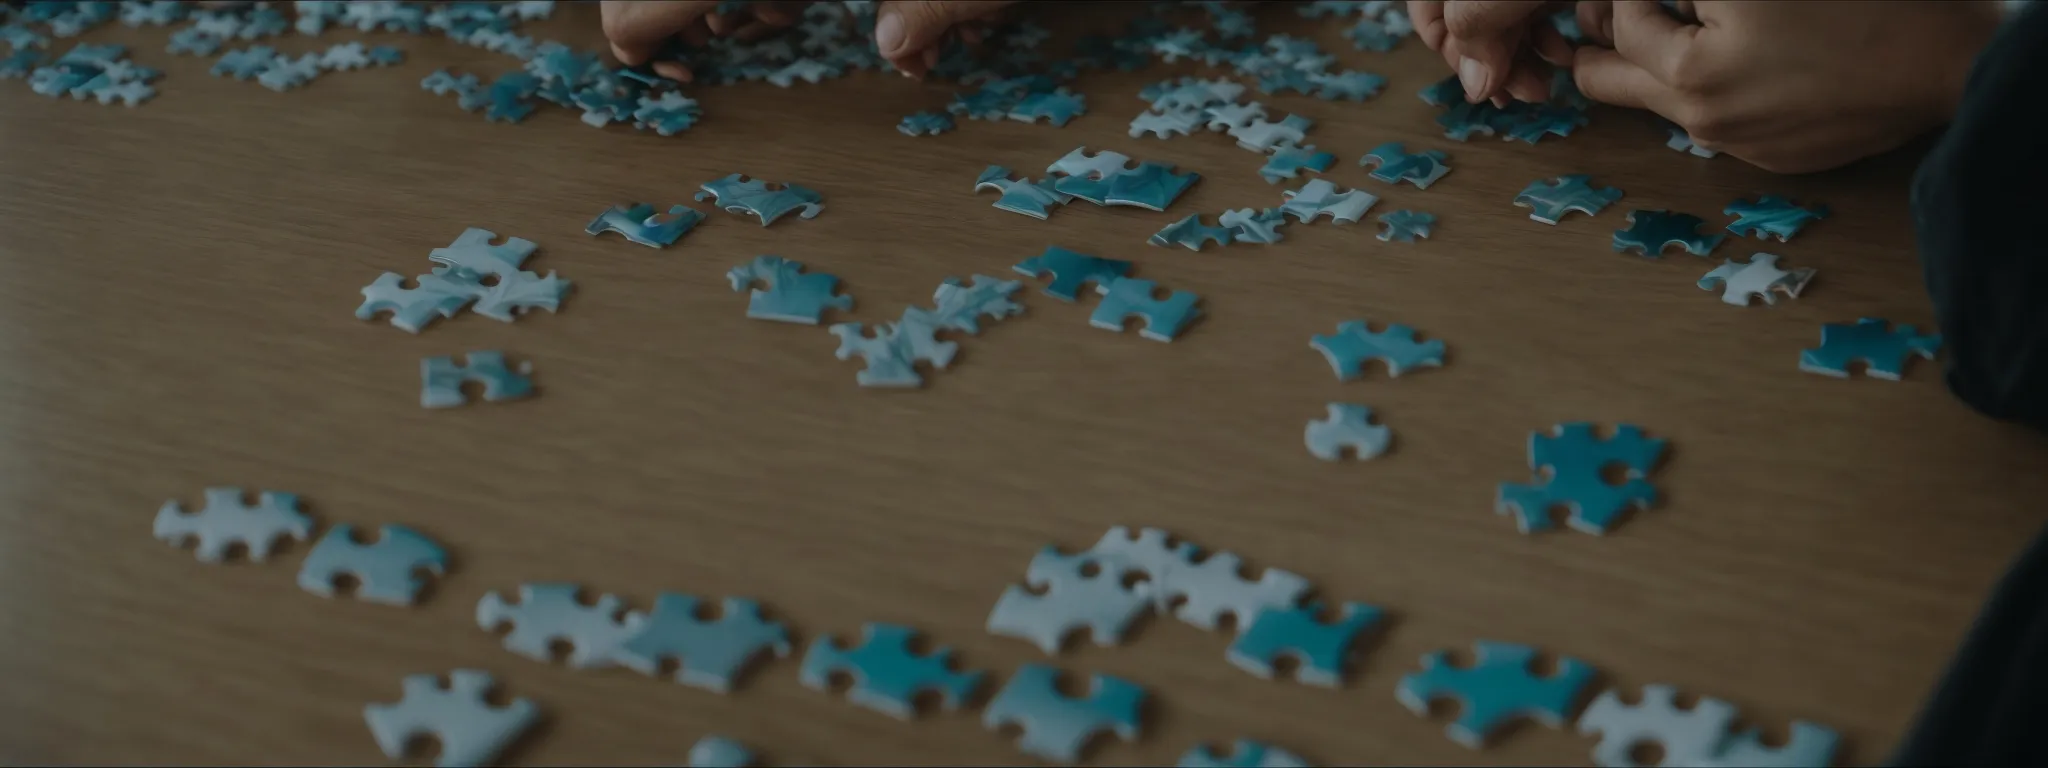 a person masterfully arranging puzzle pieces into a greater picture on a well-lit table.